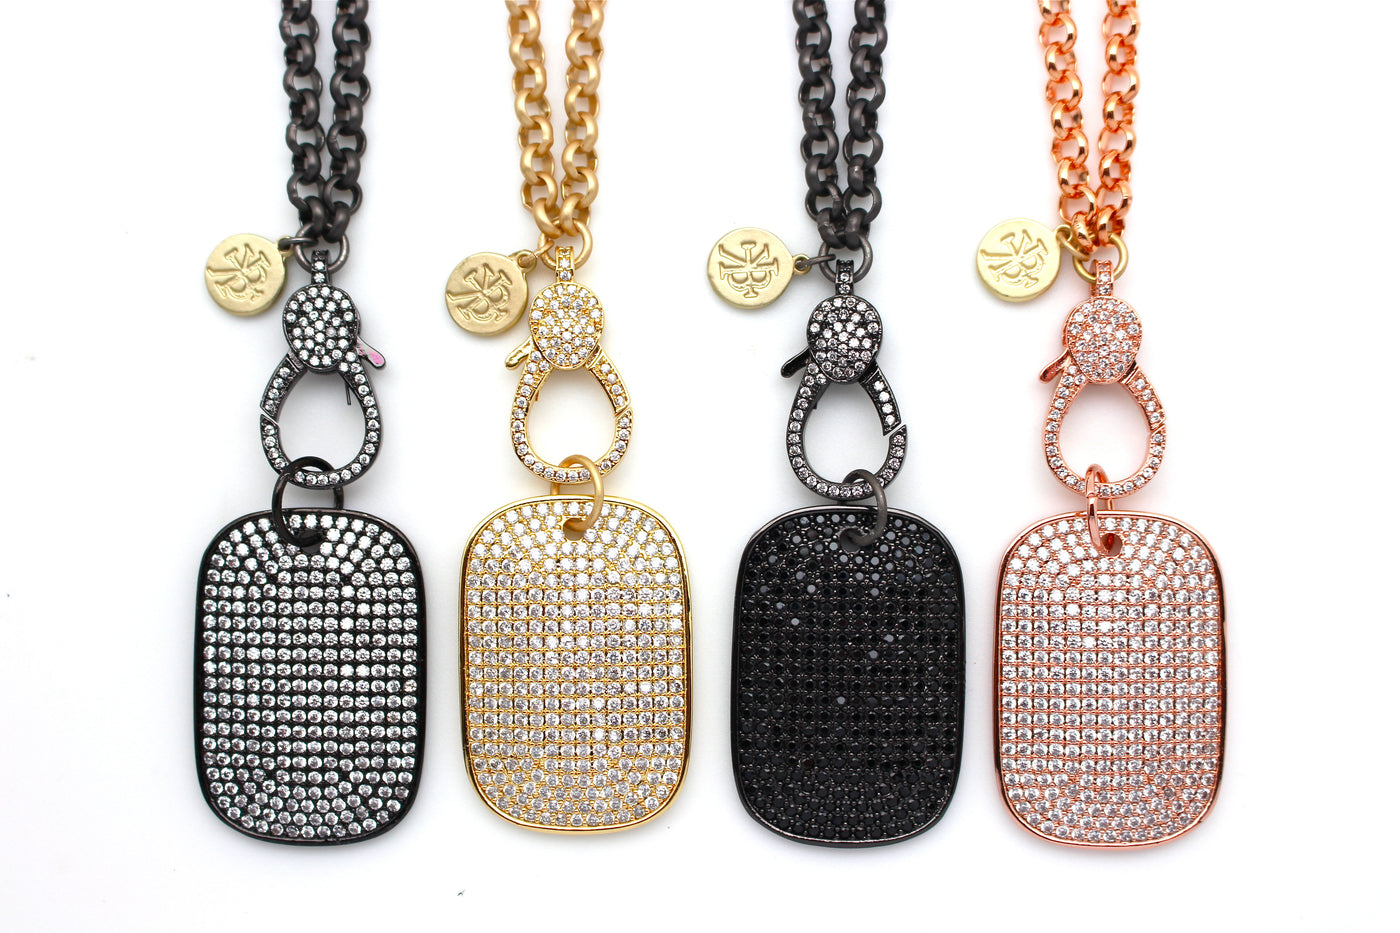 Pave’ Crystal Black Dog Tag by Karli Buxton - Corinne Boutique Family Owned and Operated USA